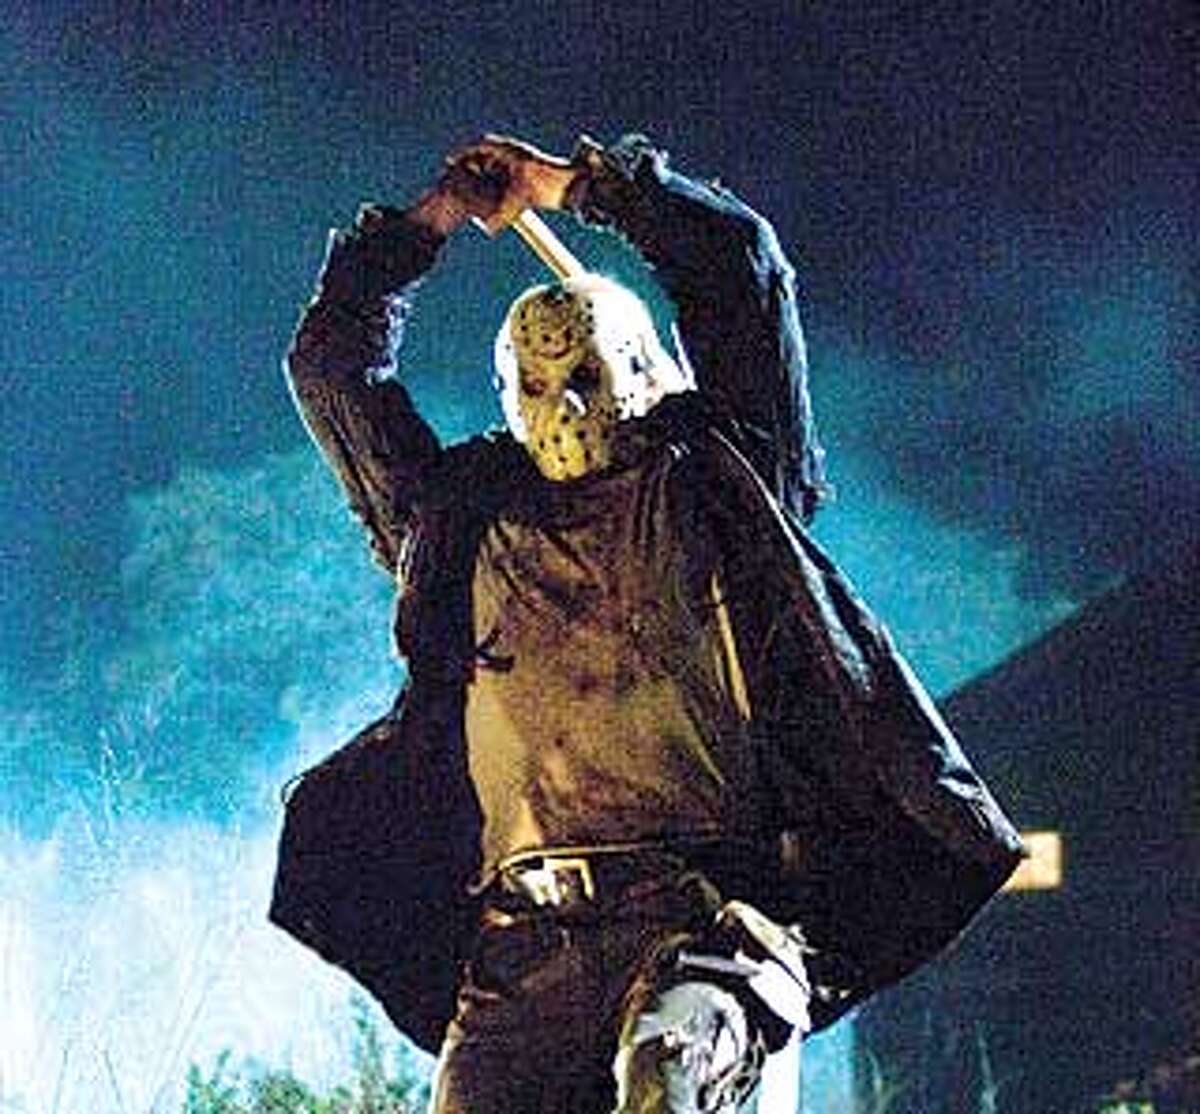 Here's Jason ... again: Dreadful reboot of classic franchise full of gore,  empty of plot